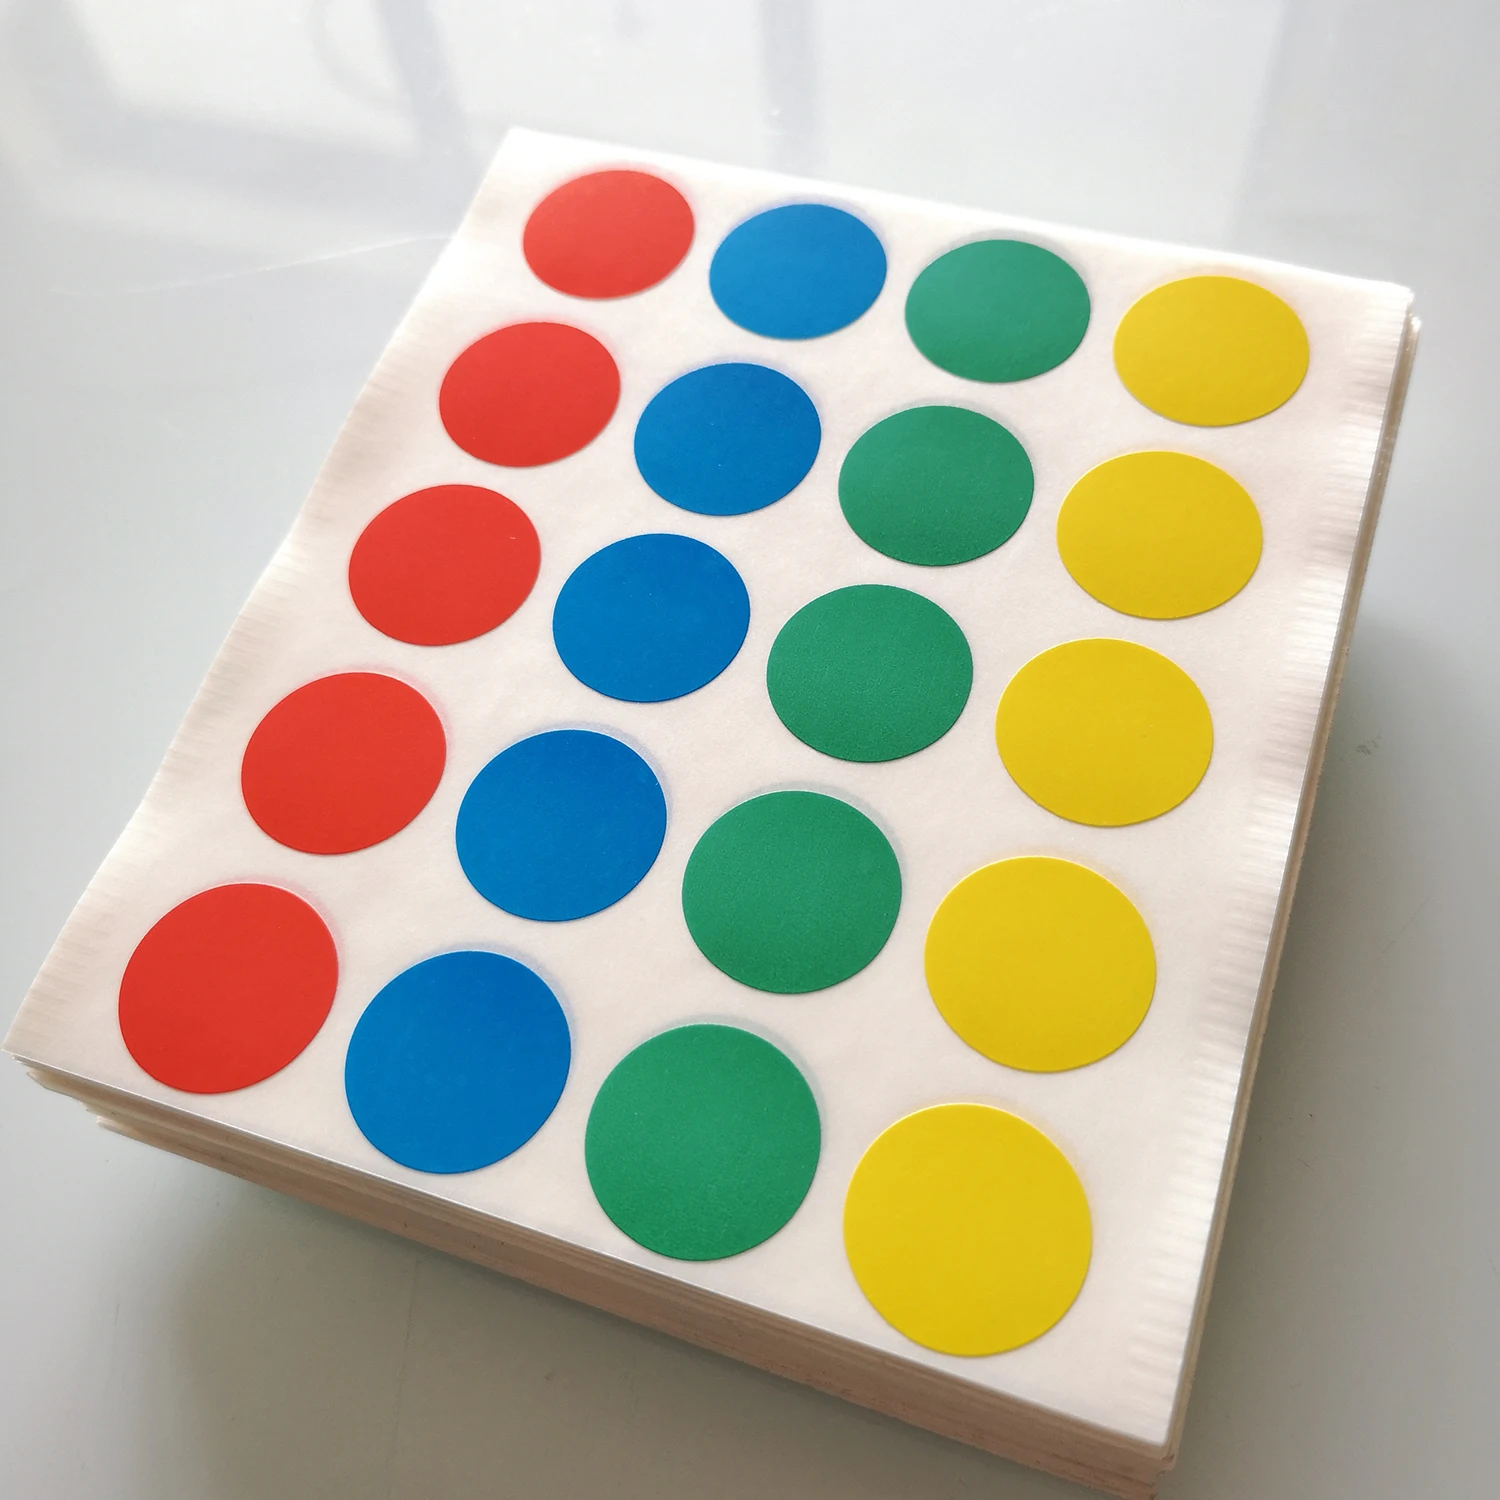 2000 sheets diameter 20mm Colorful round paper sticker, mixed red blue green yellow OF08